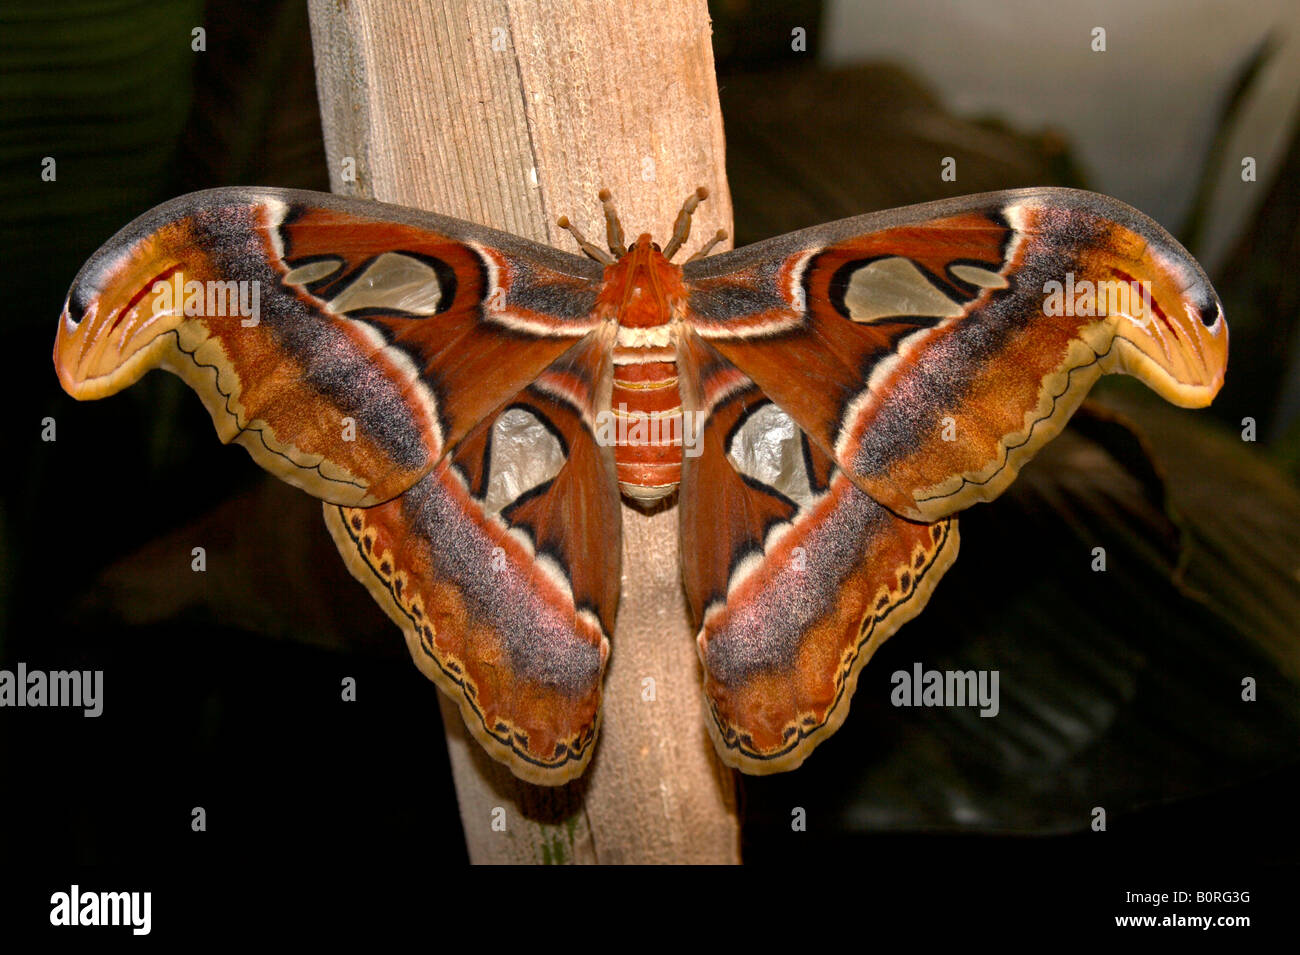 Atlas moth in the butterfly exhibition in the American Museum of Natural History, New York City Stock Photo